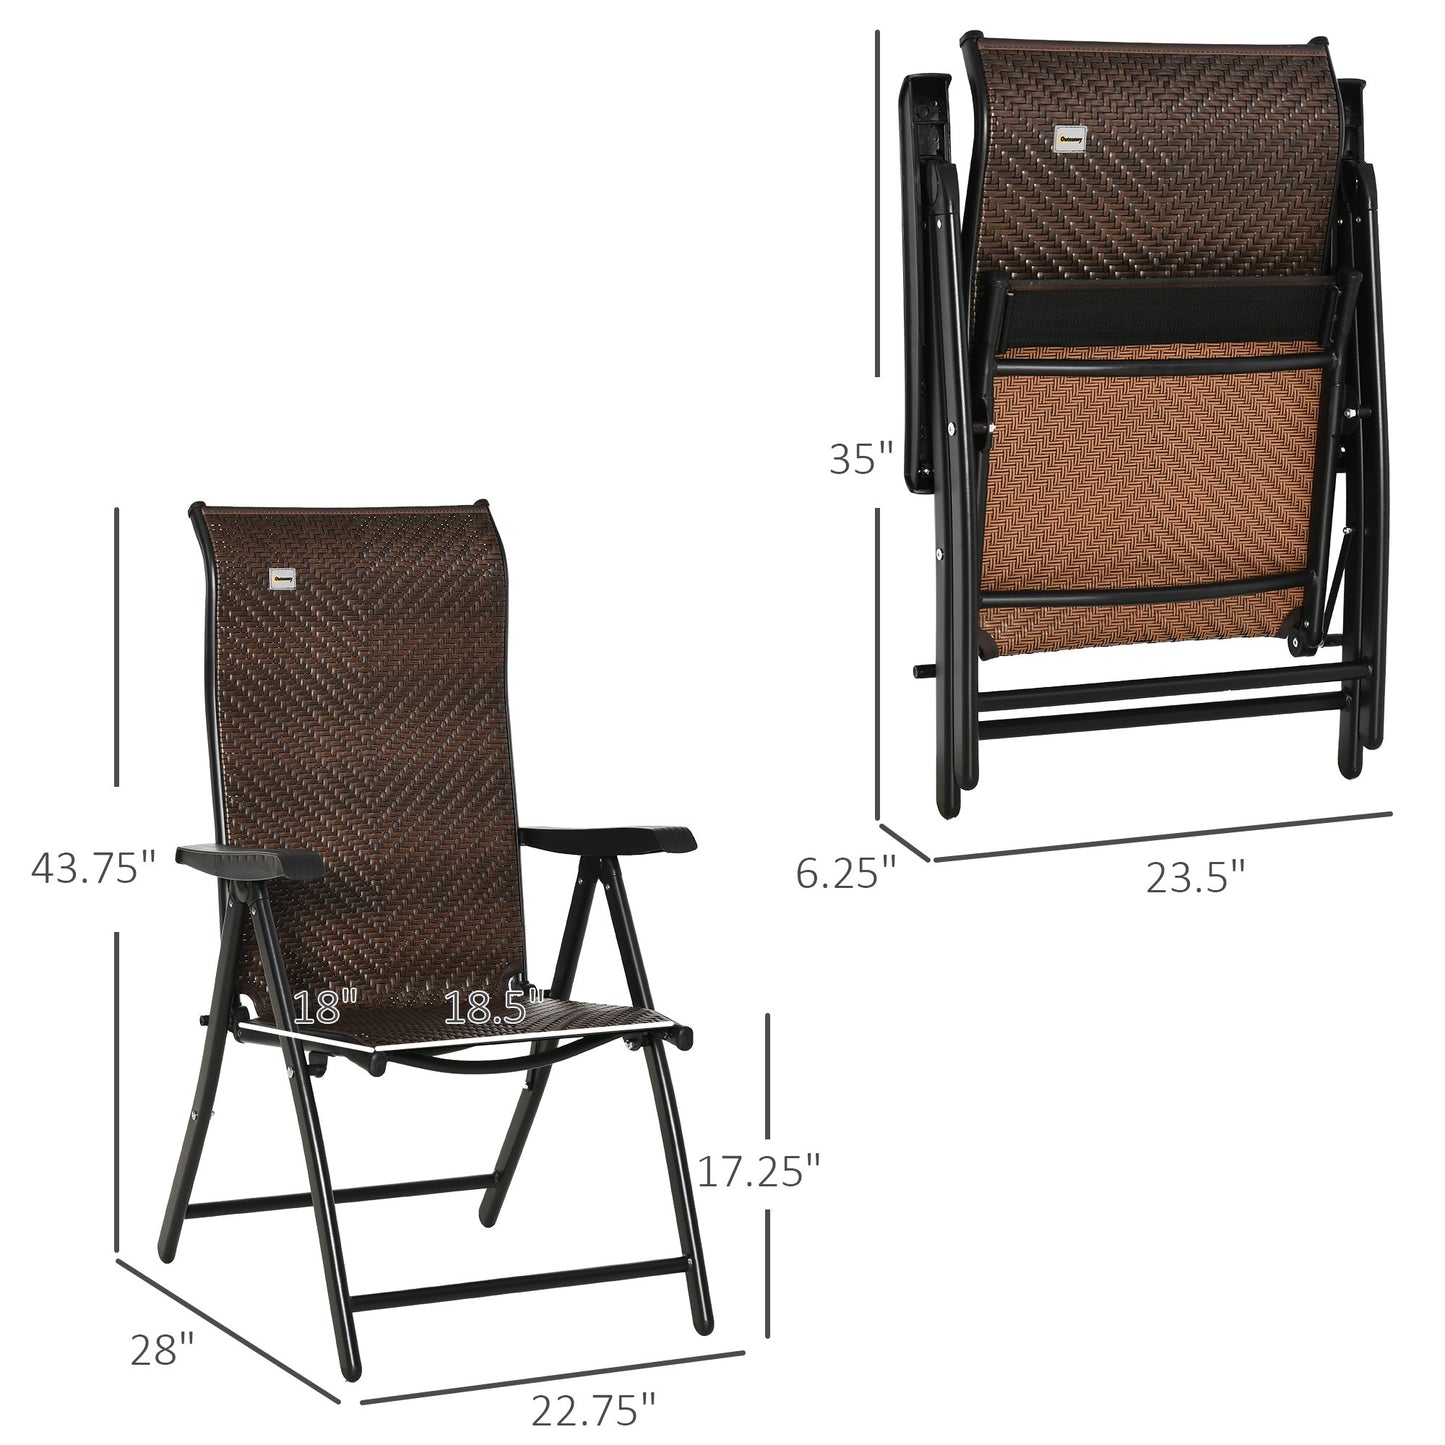 Outdoor and Garden-Wicker Folding Patio Chair, Outdoor PE Rattan Recliner Camping Chairs with 7-Level Adjustable High Backrest for Garden, Balcony, Brown - Outdoor Style Company